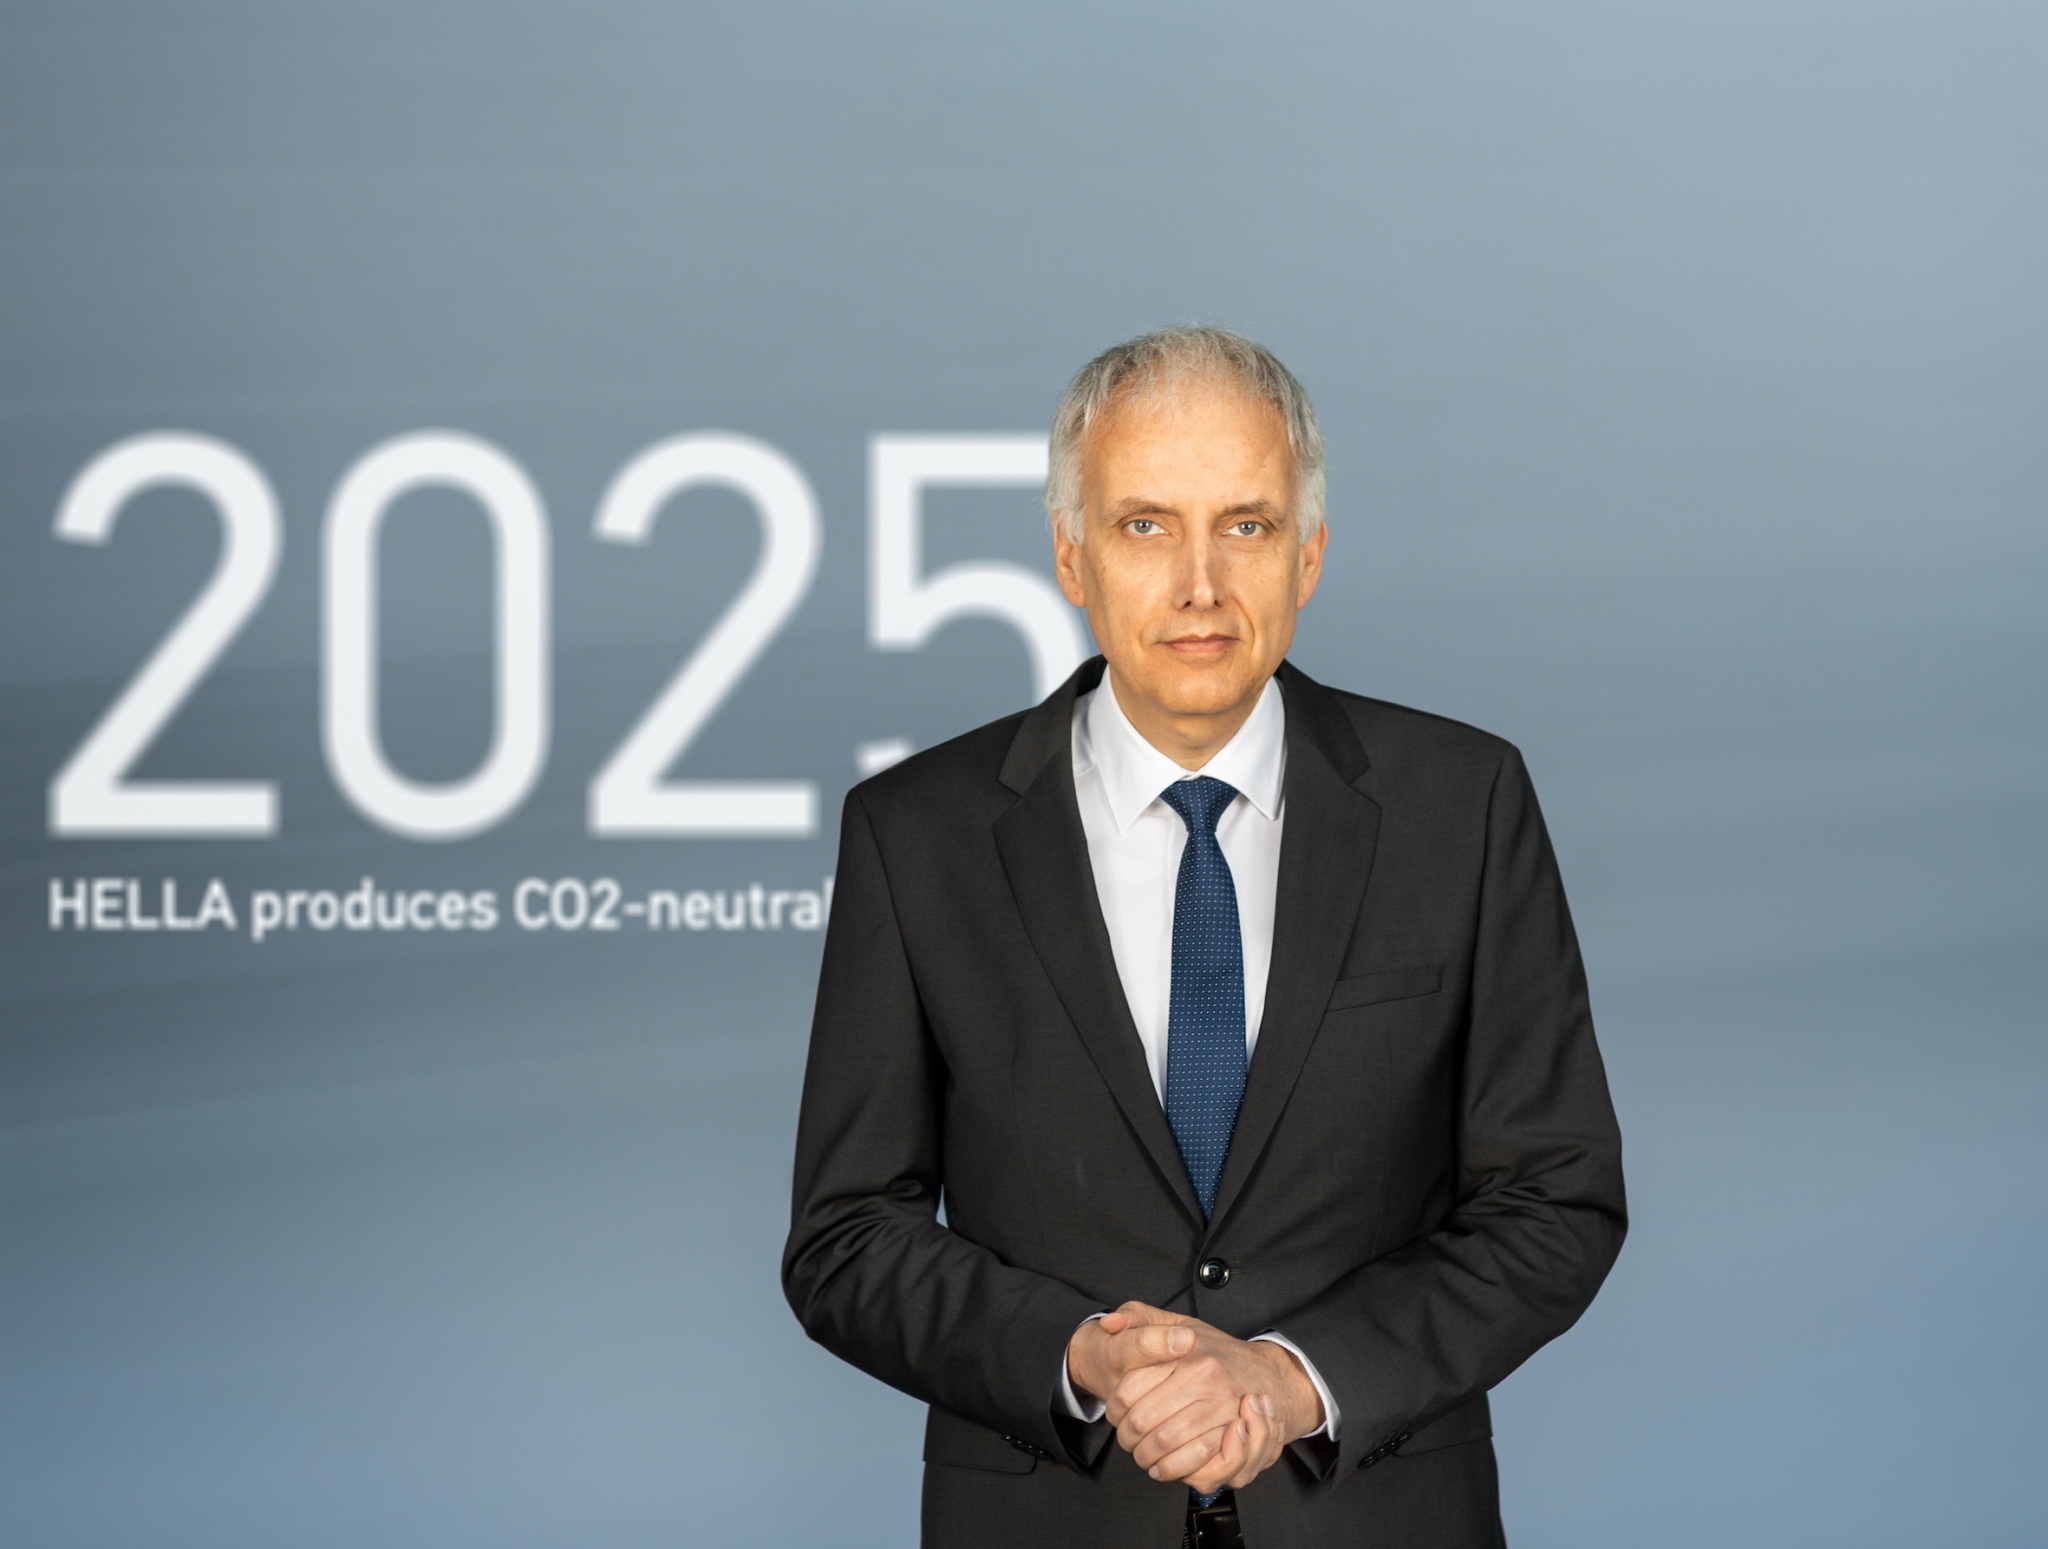 Hella aims for climate-neutral production by 2025